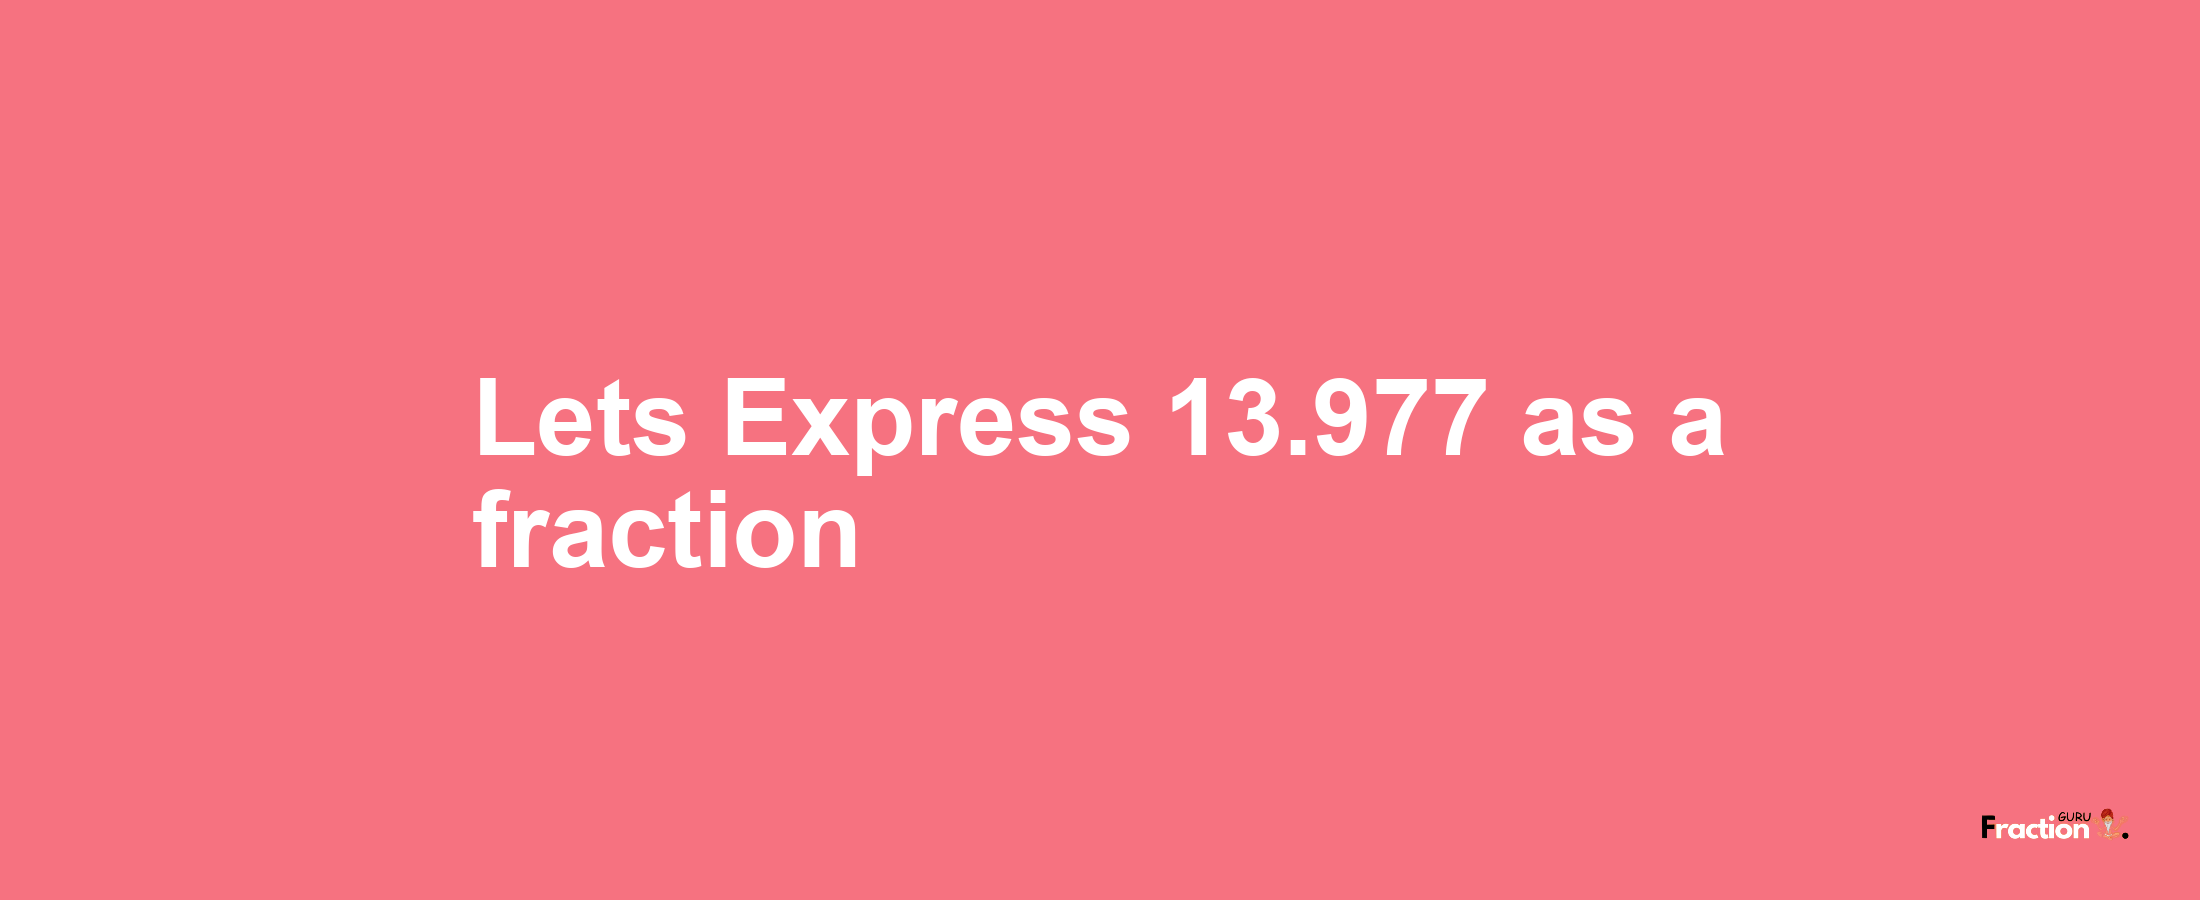 Lets Express 13.977 as afraction